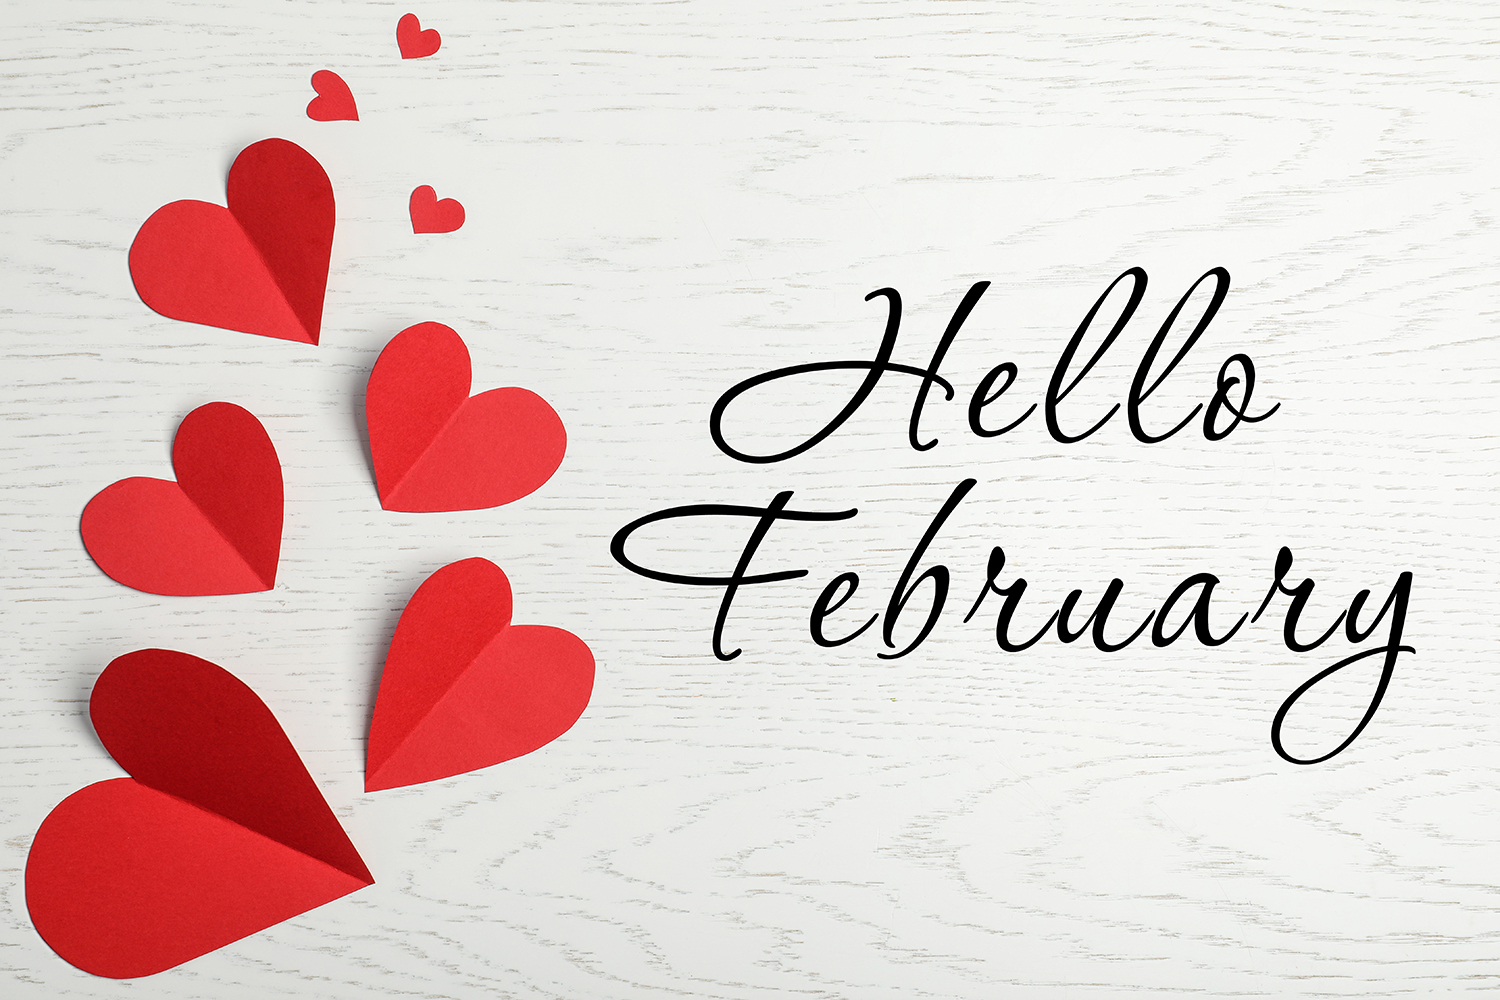 Check Out These Sparks And Reno Events In February To Love!